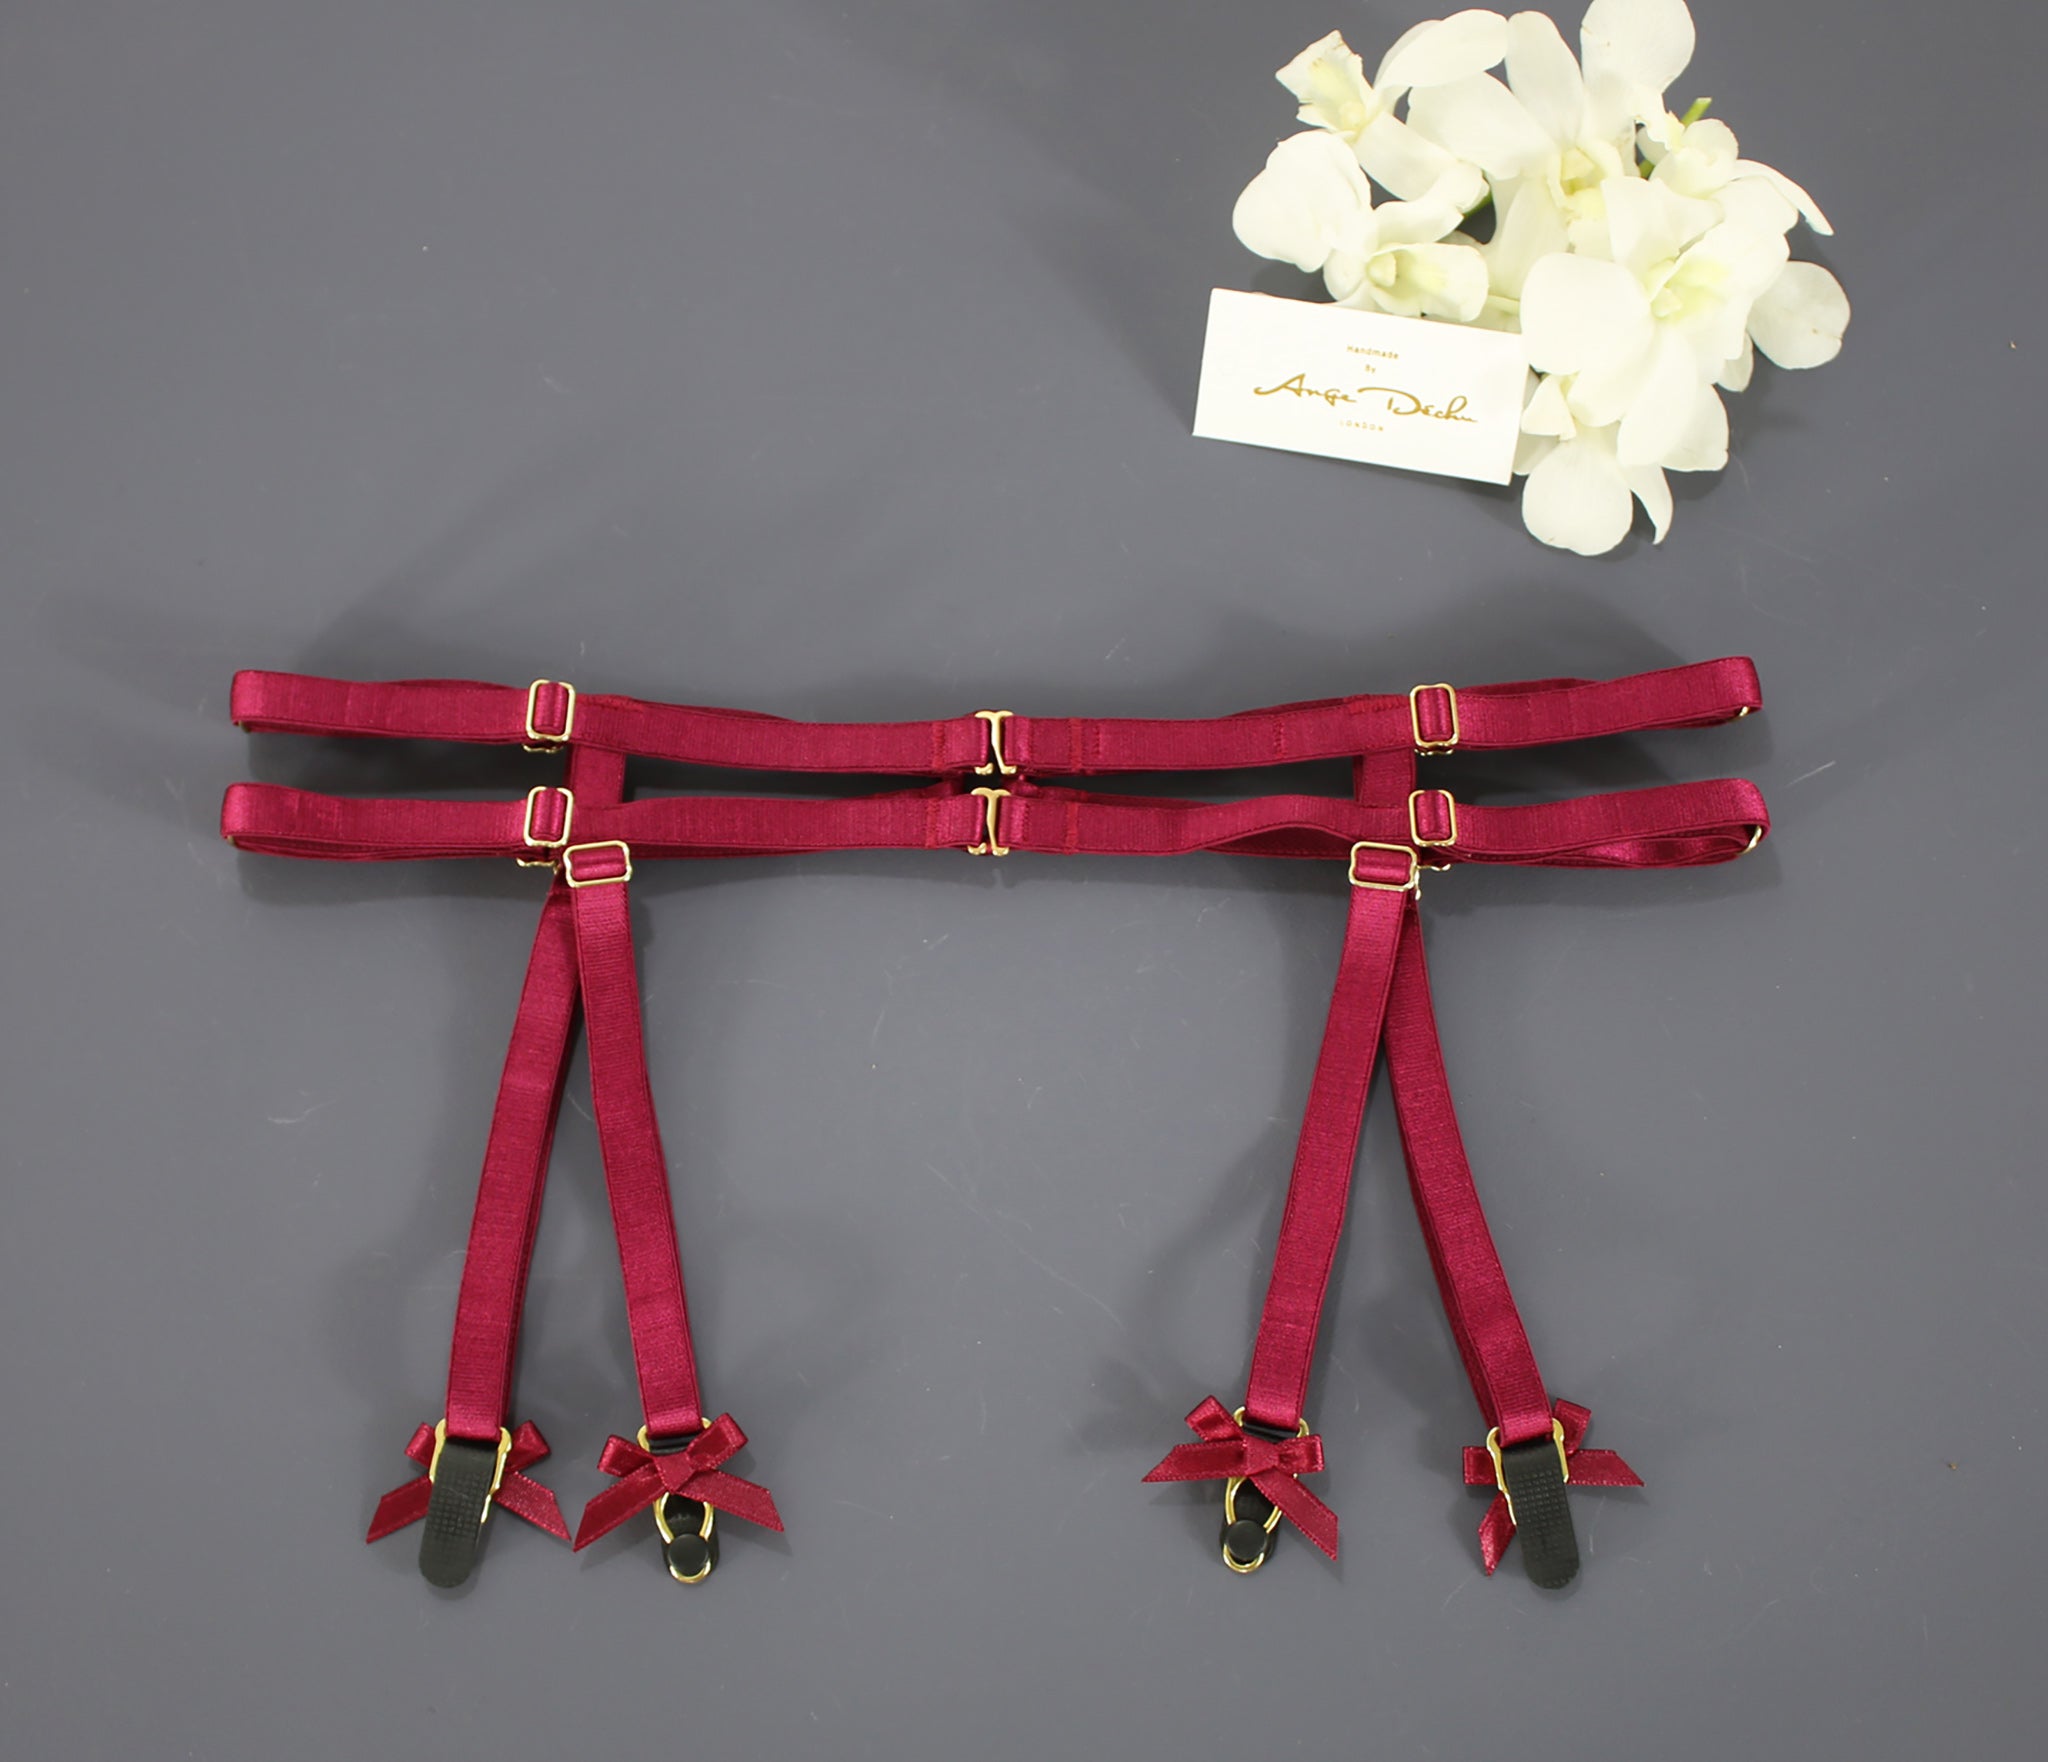 Body harness set in red with choker sexy garter belt harness garter and suspender boudoir gift for her - Ange Déchu